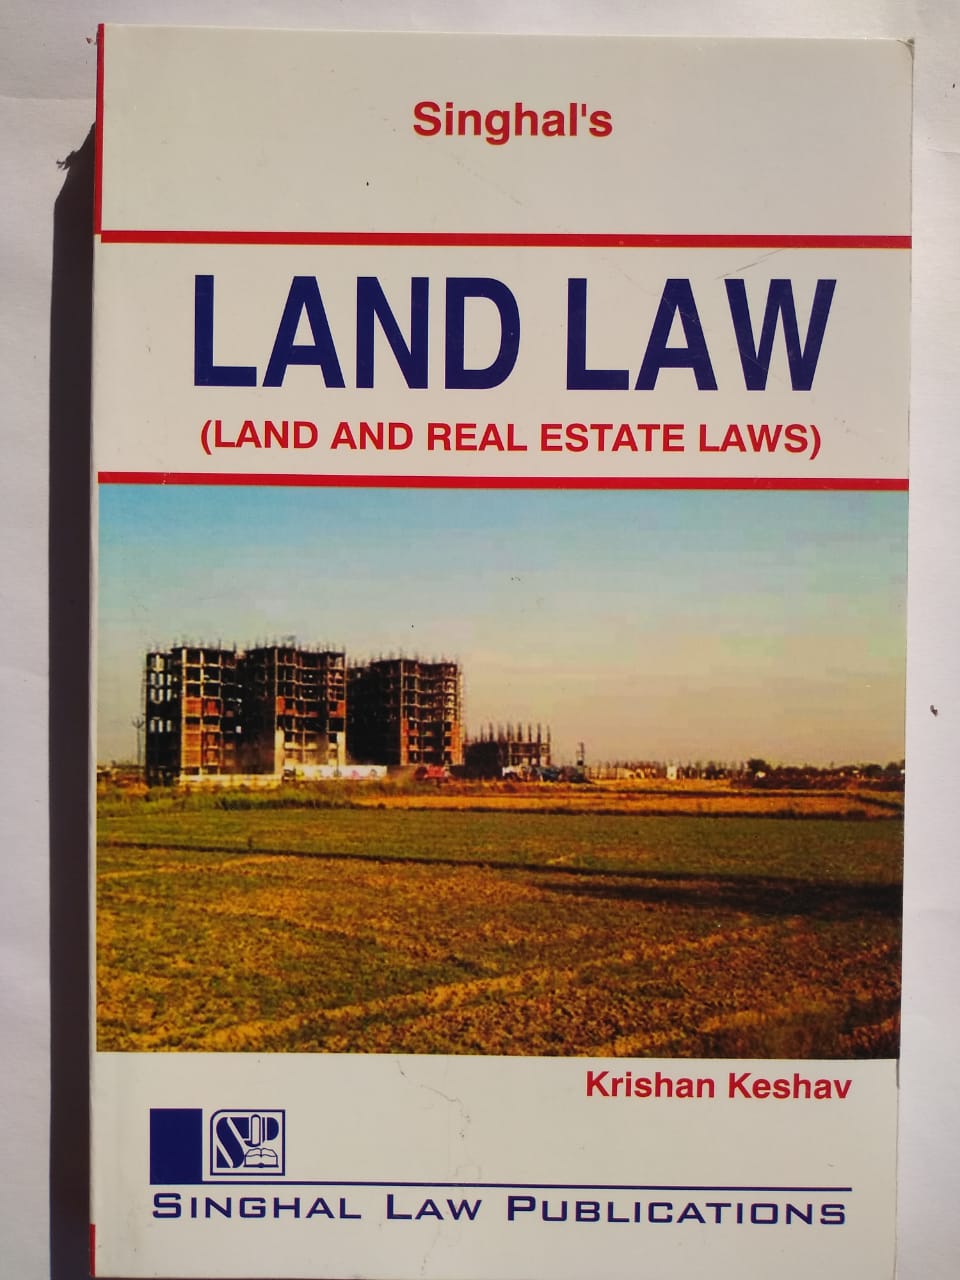 Singhal's Land Law